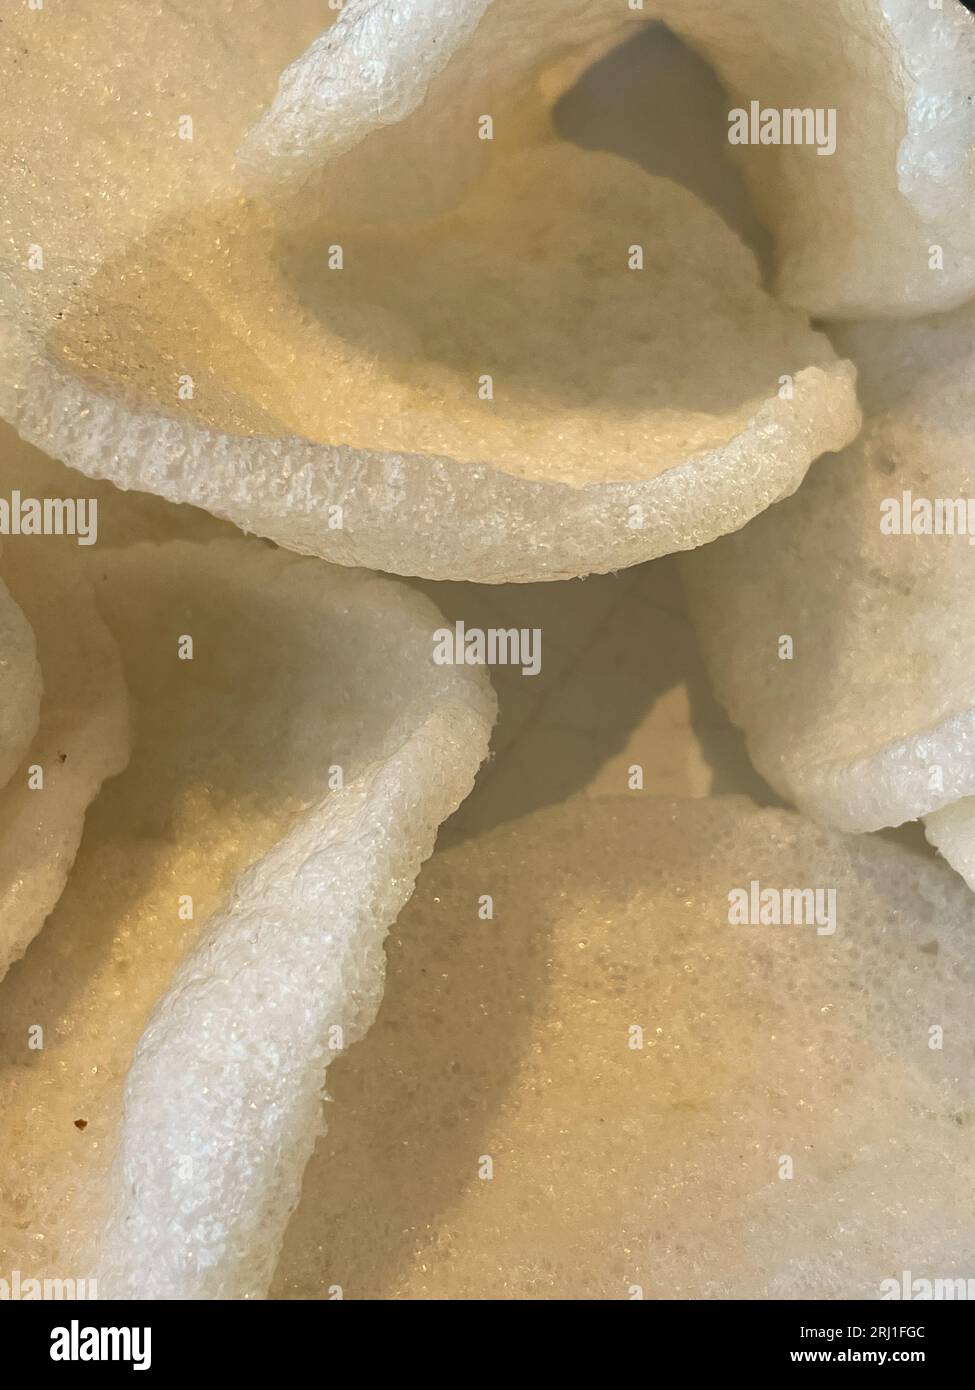 Kerupuk Udang or Prawn crackers are made from tapioca flour and finely ground shrimp mixed with herbs and flavor enhancers. Stock Photo